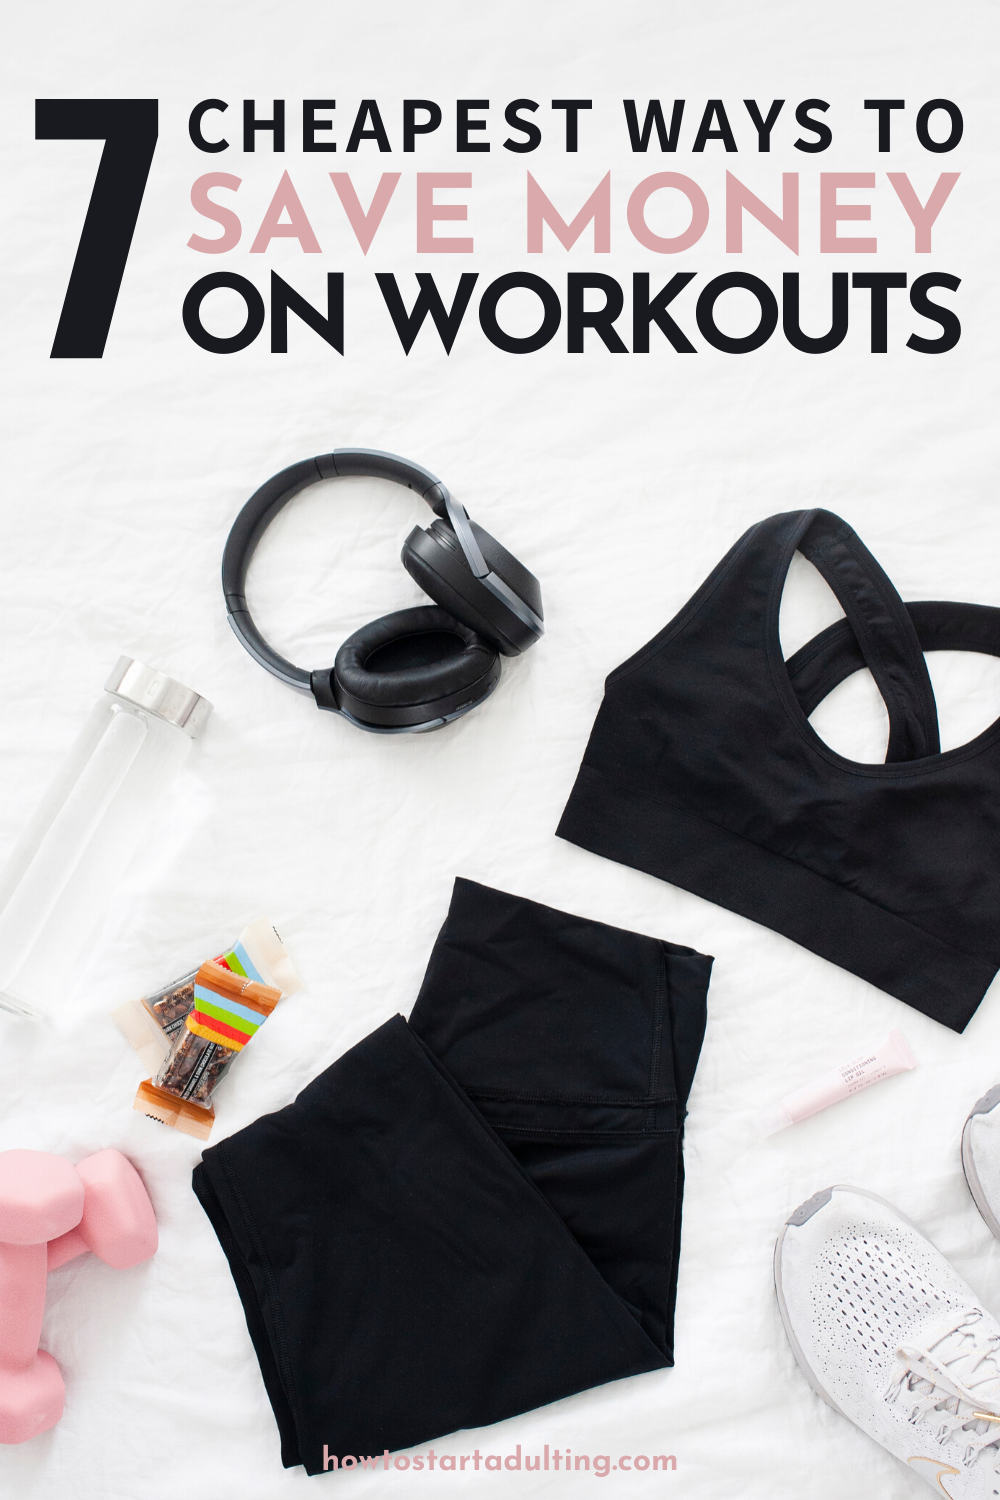 Cheapest Ways To Workout When You Are On A Budget, Save Money On Working Out #workout #fitness #workouts #savingmoney #budgeting #exercise #savemoney